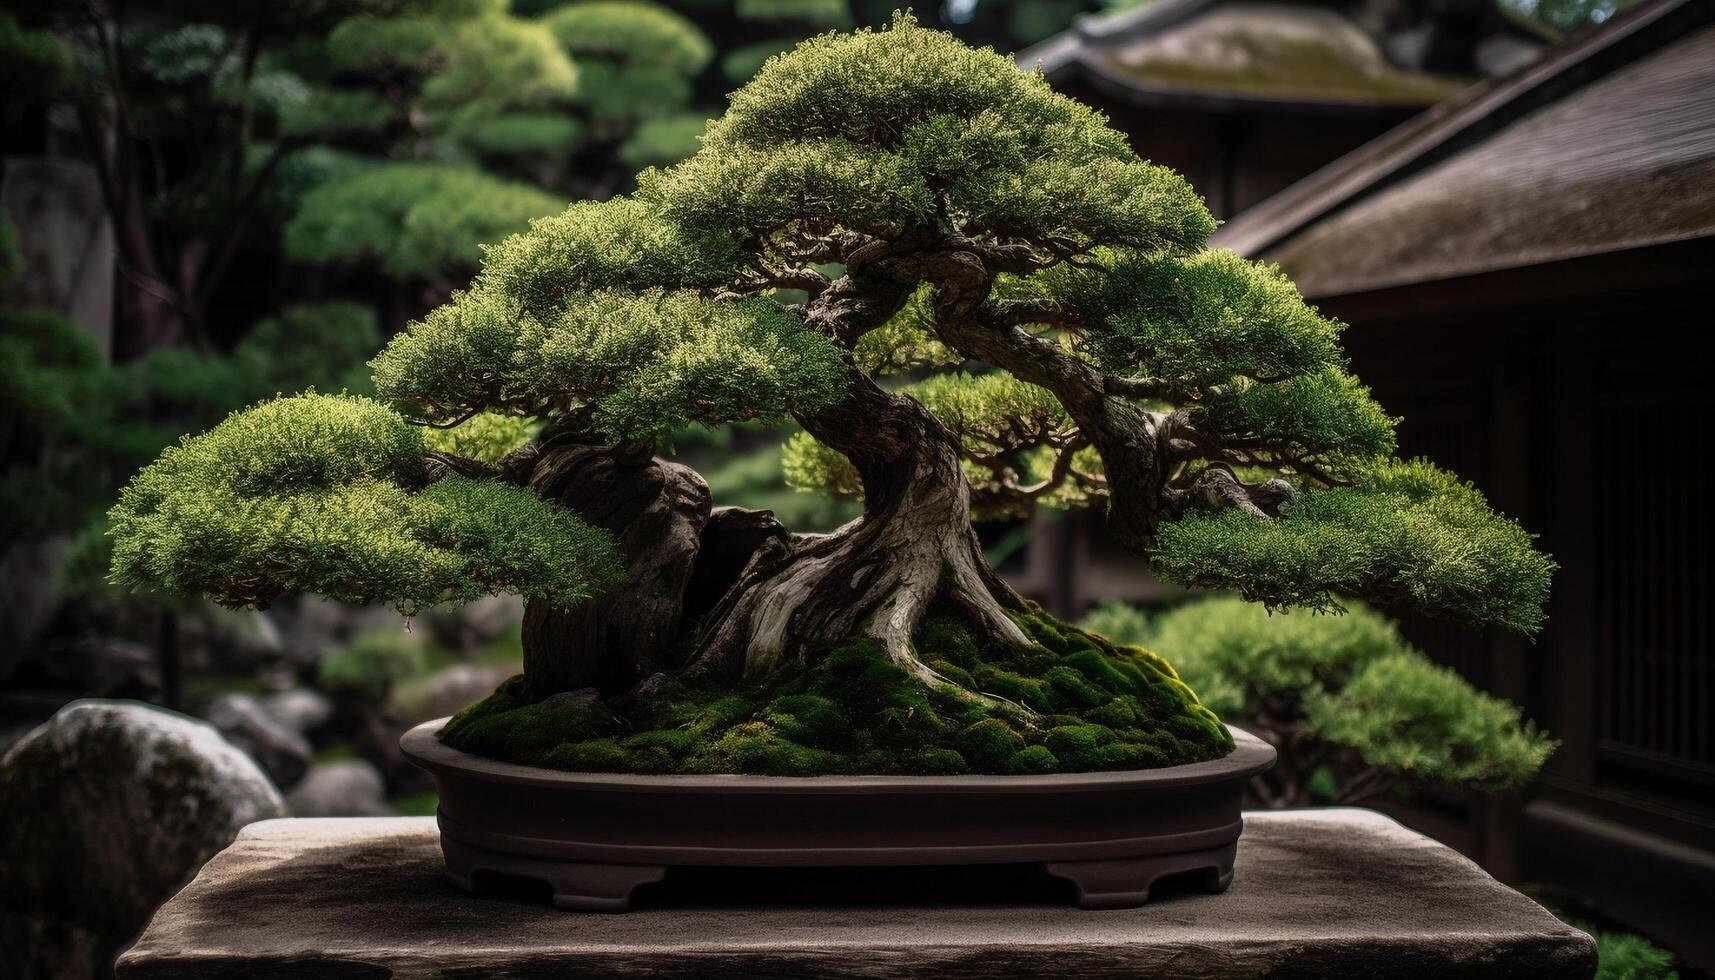 Japanese pottery decorates small pine tree in tranquil garden scene generated by AI photo